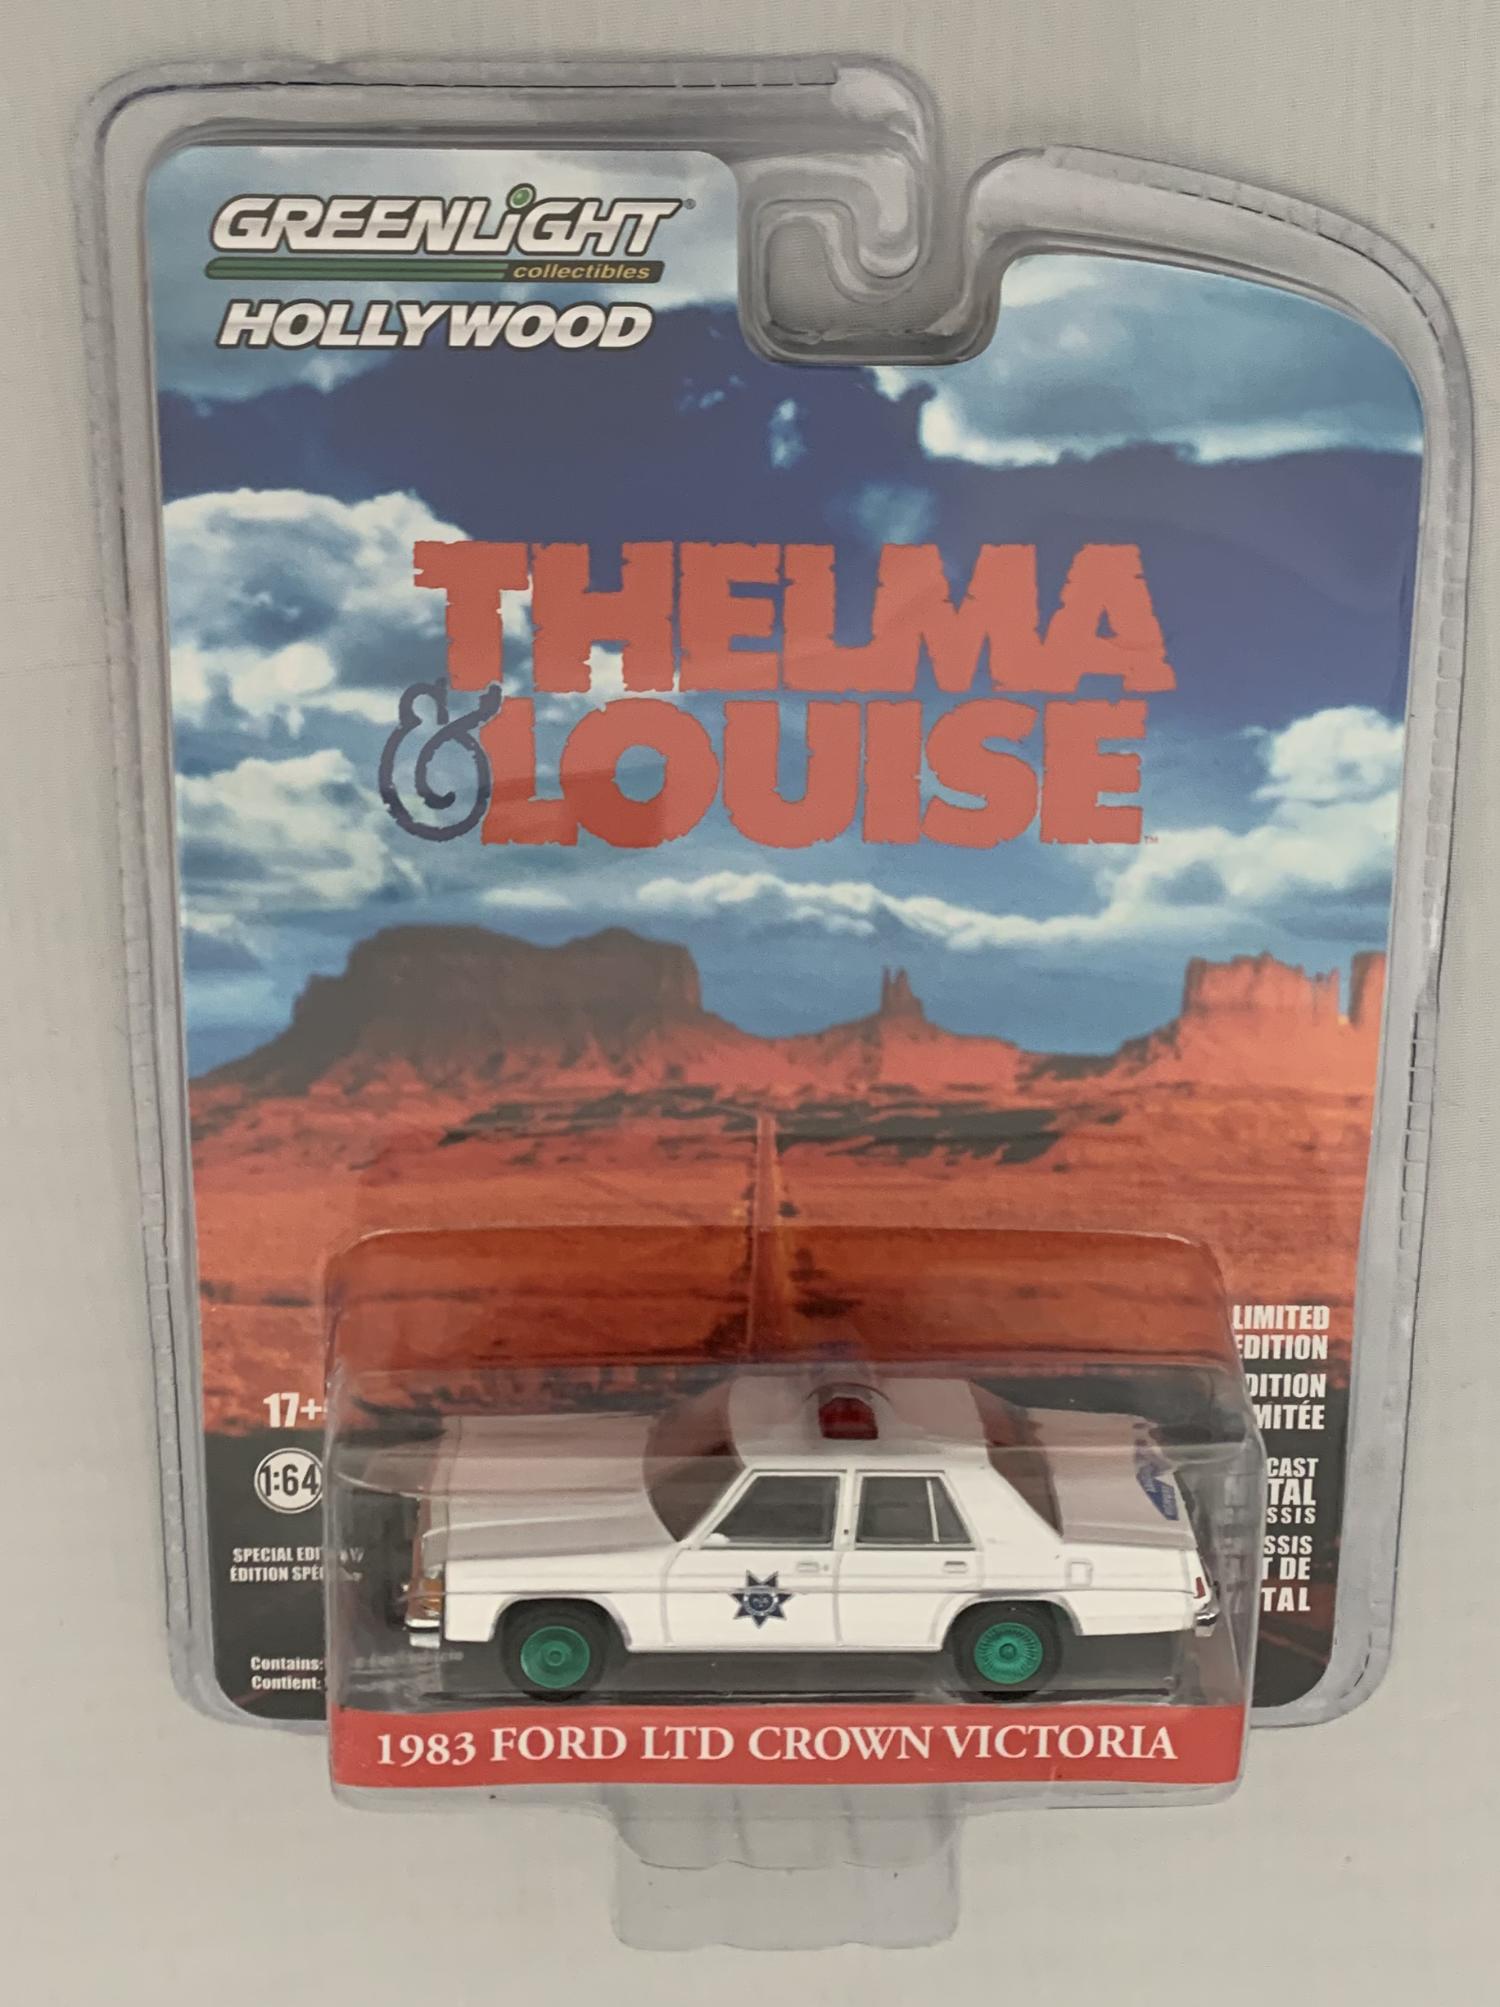 Thelma & Louise 1983 Ford Ltd Crown Victoria in white 1:64 scale model from Greenlight, Green Machine, limited edition